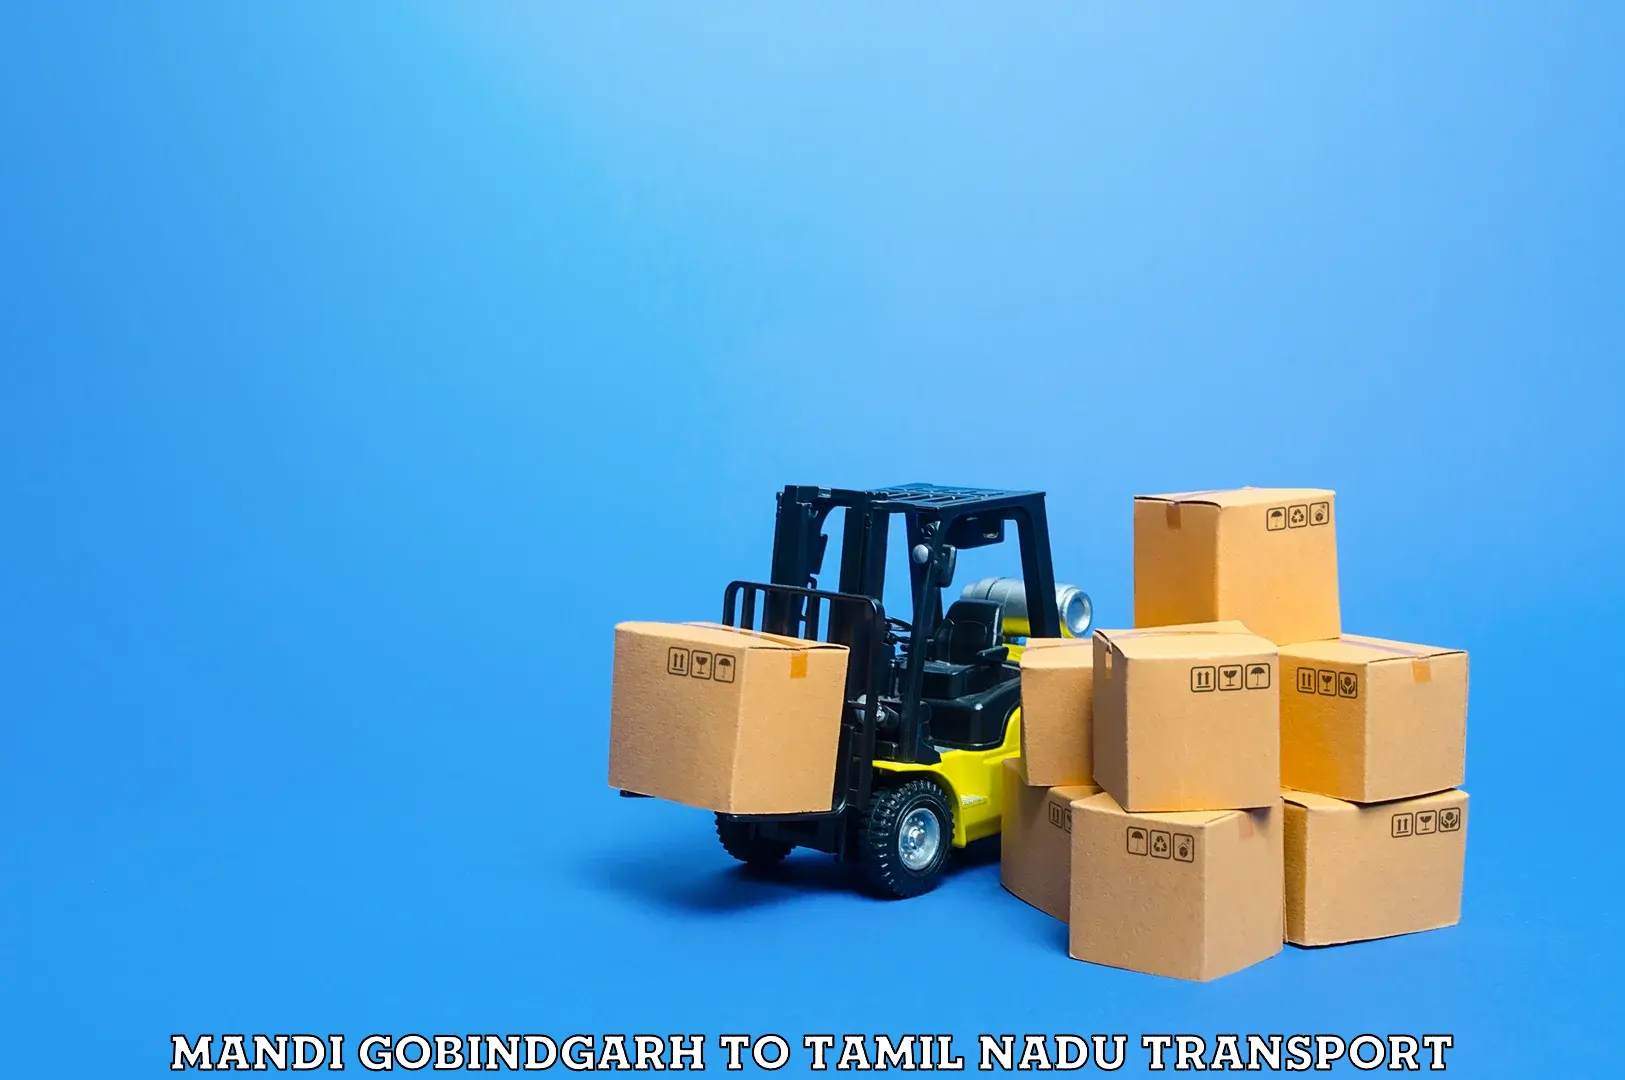 Cargo transport services Mandi Gobindgarh to Shanmugha Arts Science Technology and Research Academy Thanjavur